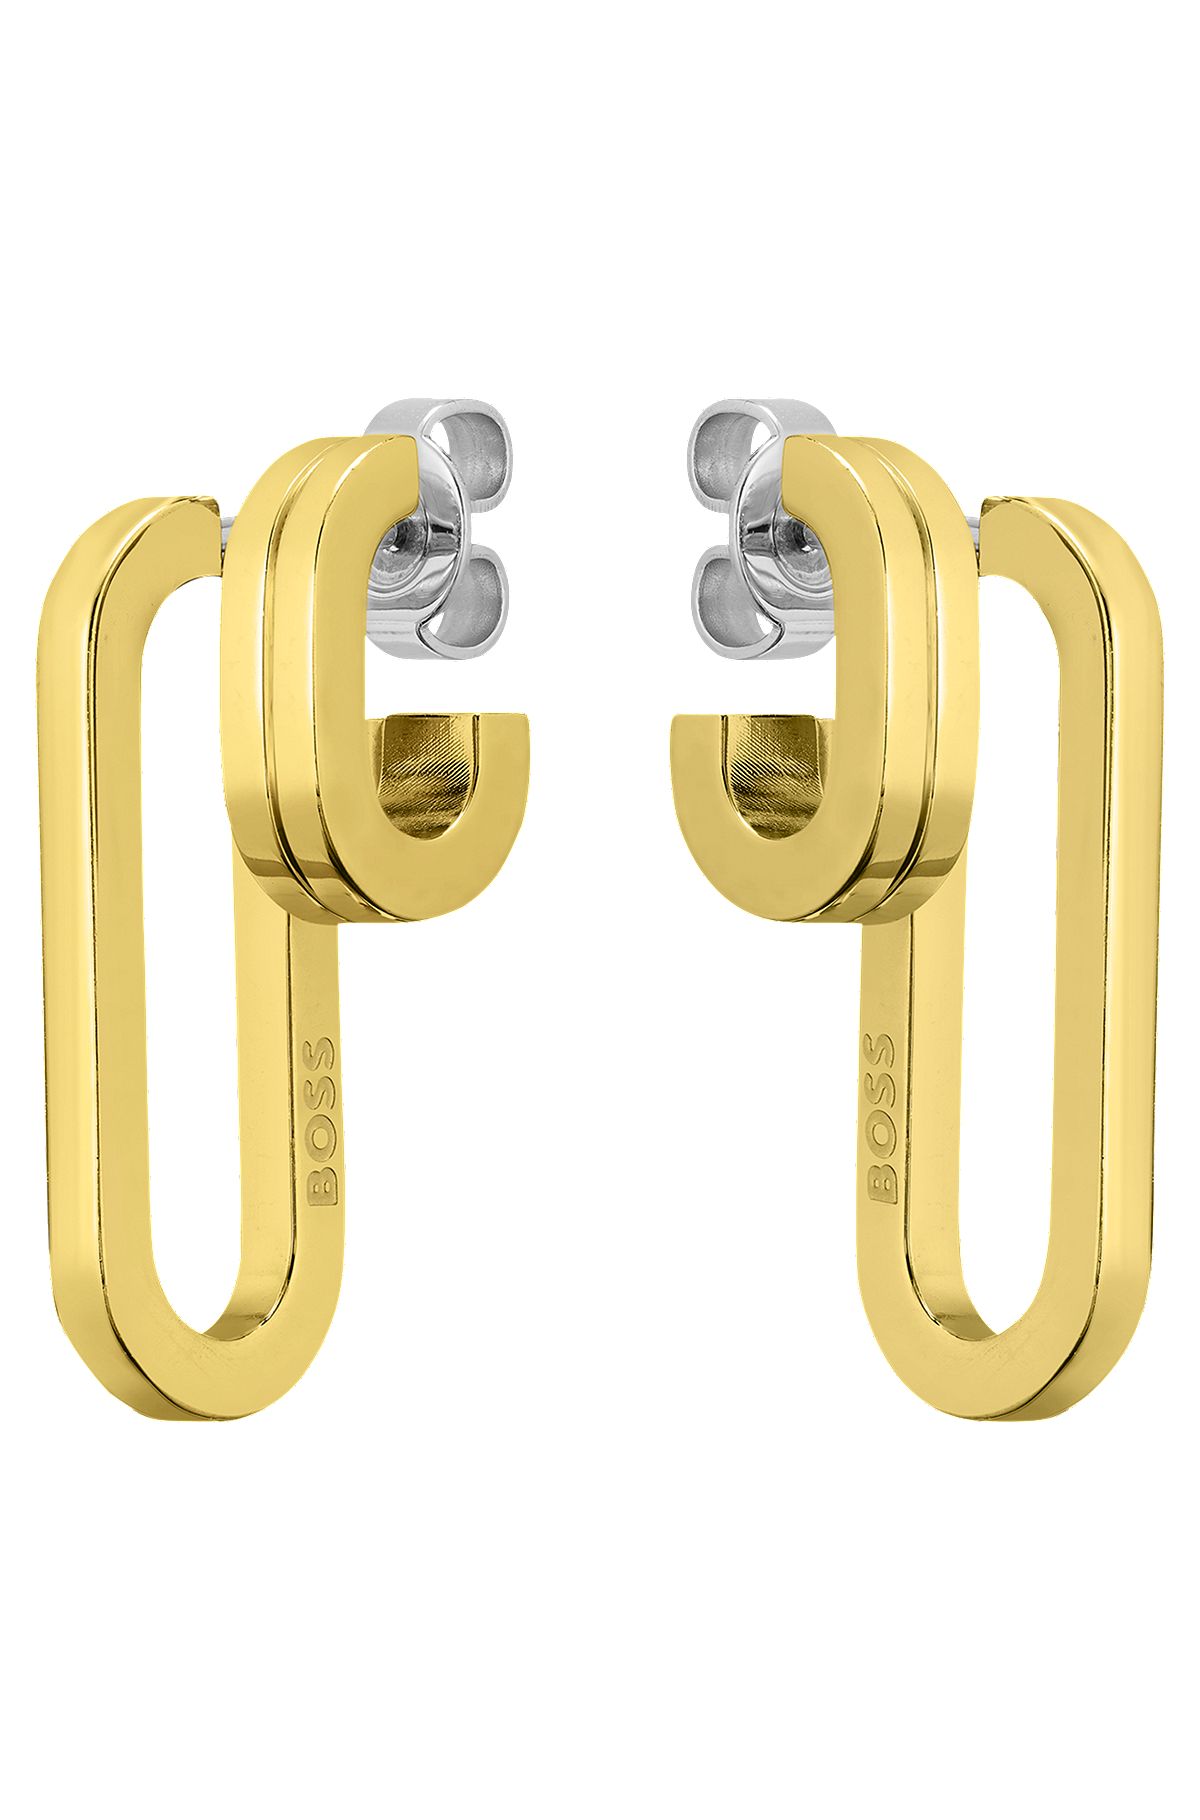 Polished-link earrings with stainless-steel posts, Gold